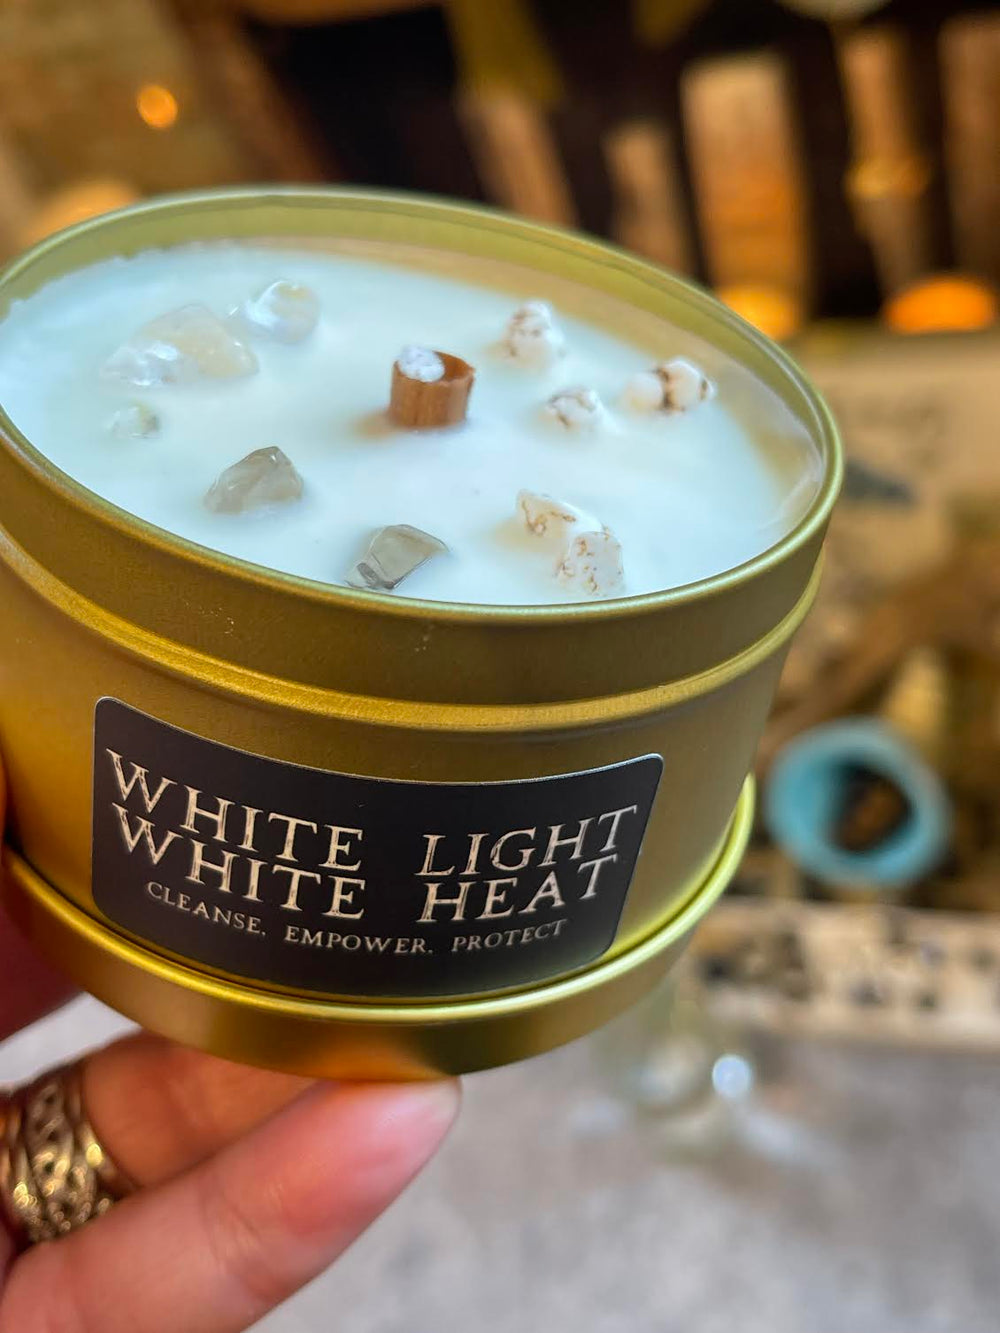 This is the front of the White Light, White Heat candle